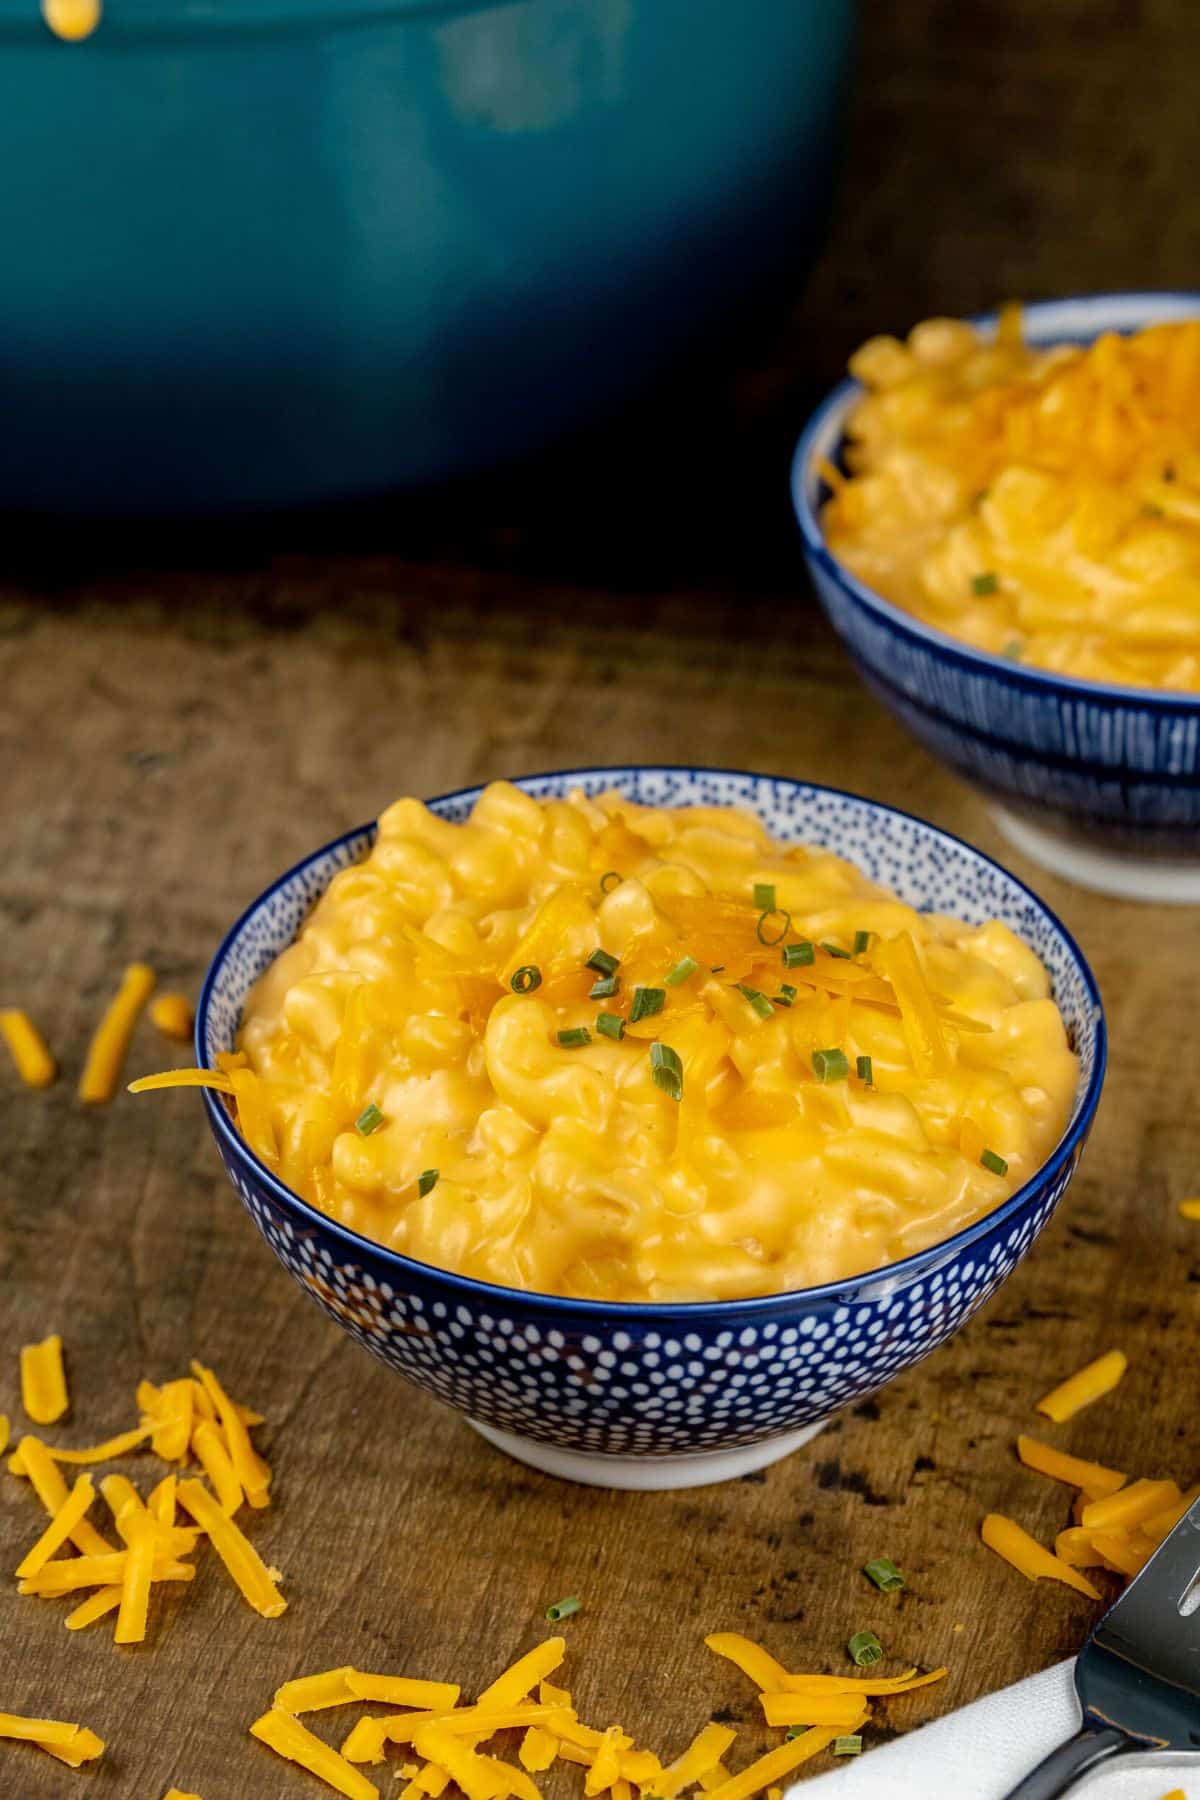 two bowls filled with Mac and cheese and extra cheese sprinkled around the bowls